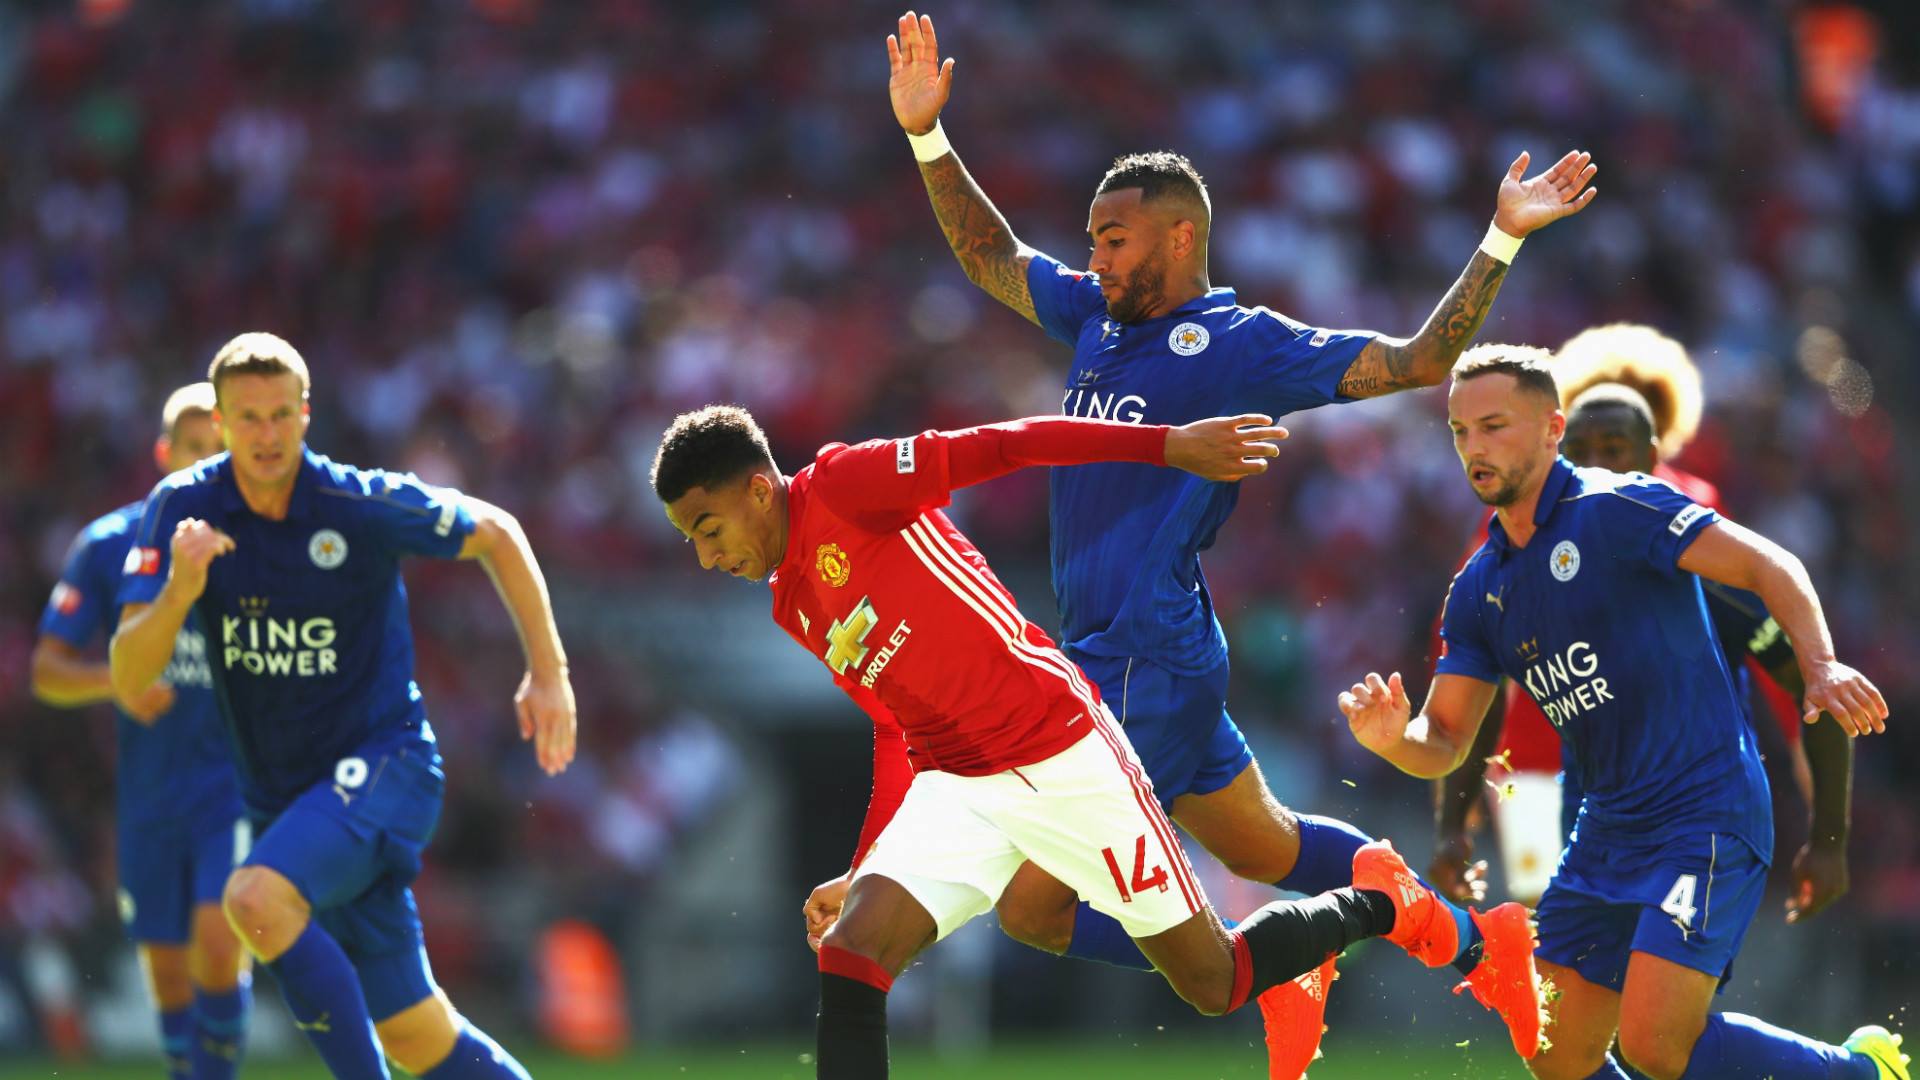 Manchester United vs Leicester